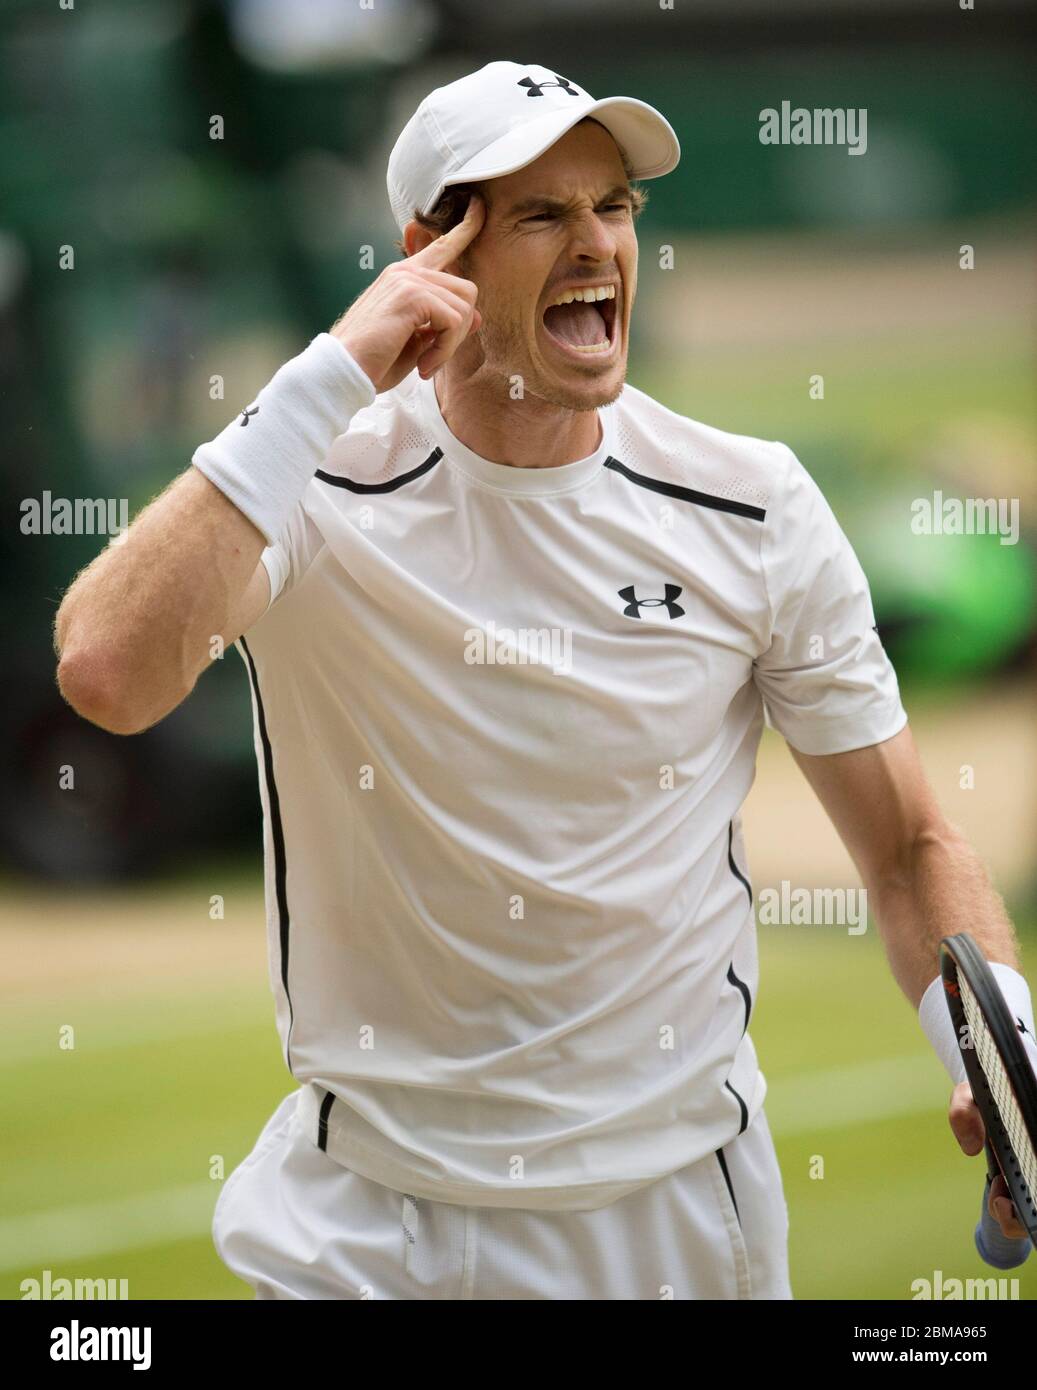 July 5th 2016, Wimbledon Championships London. Andy Murray shouts out during his Mens singles Quarter Final against Jo Wilfred Tsoga on Centre Court. Stock Photo